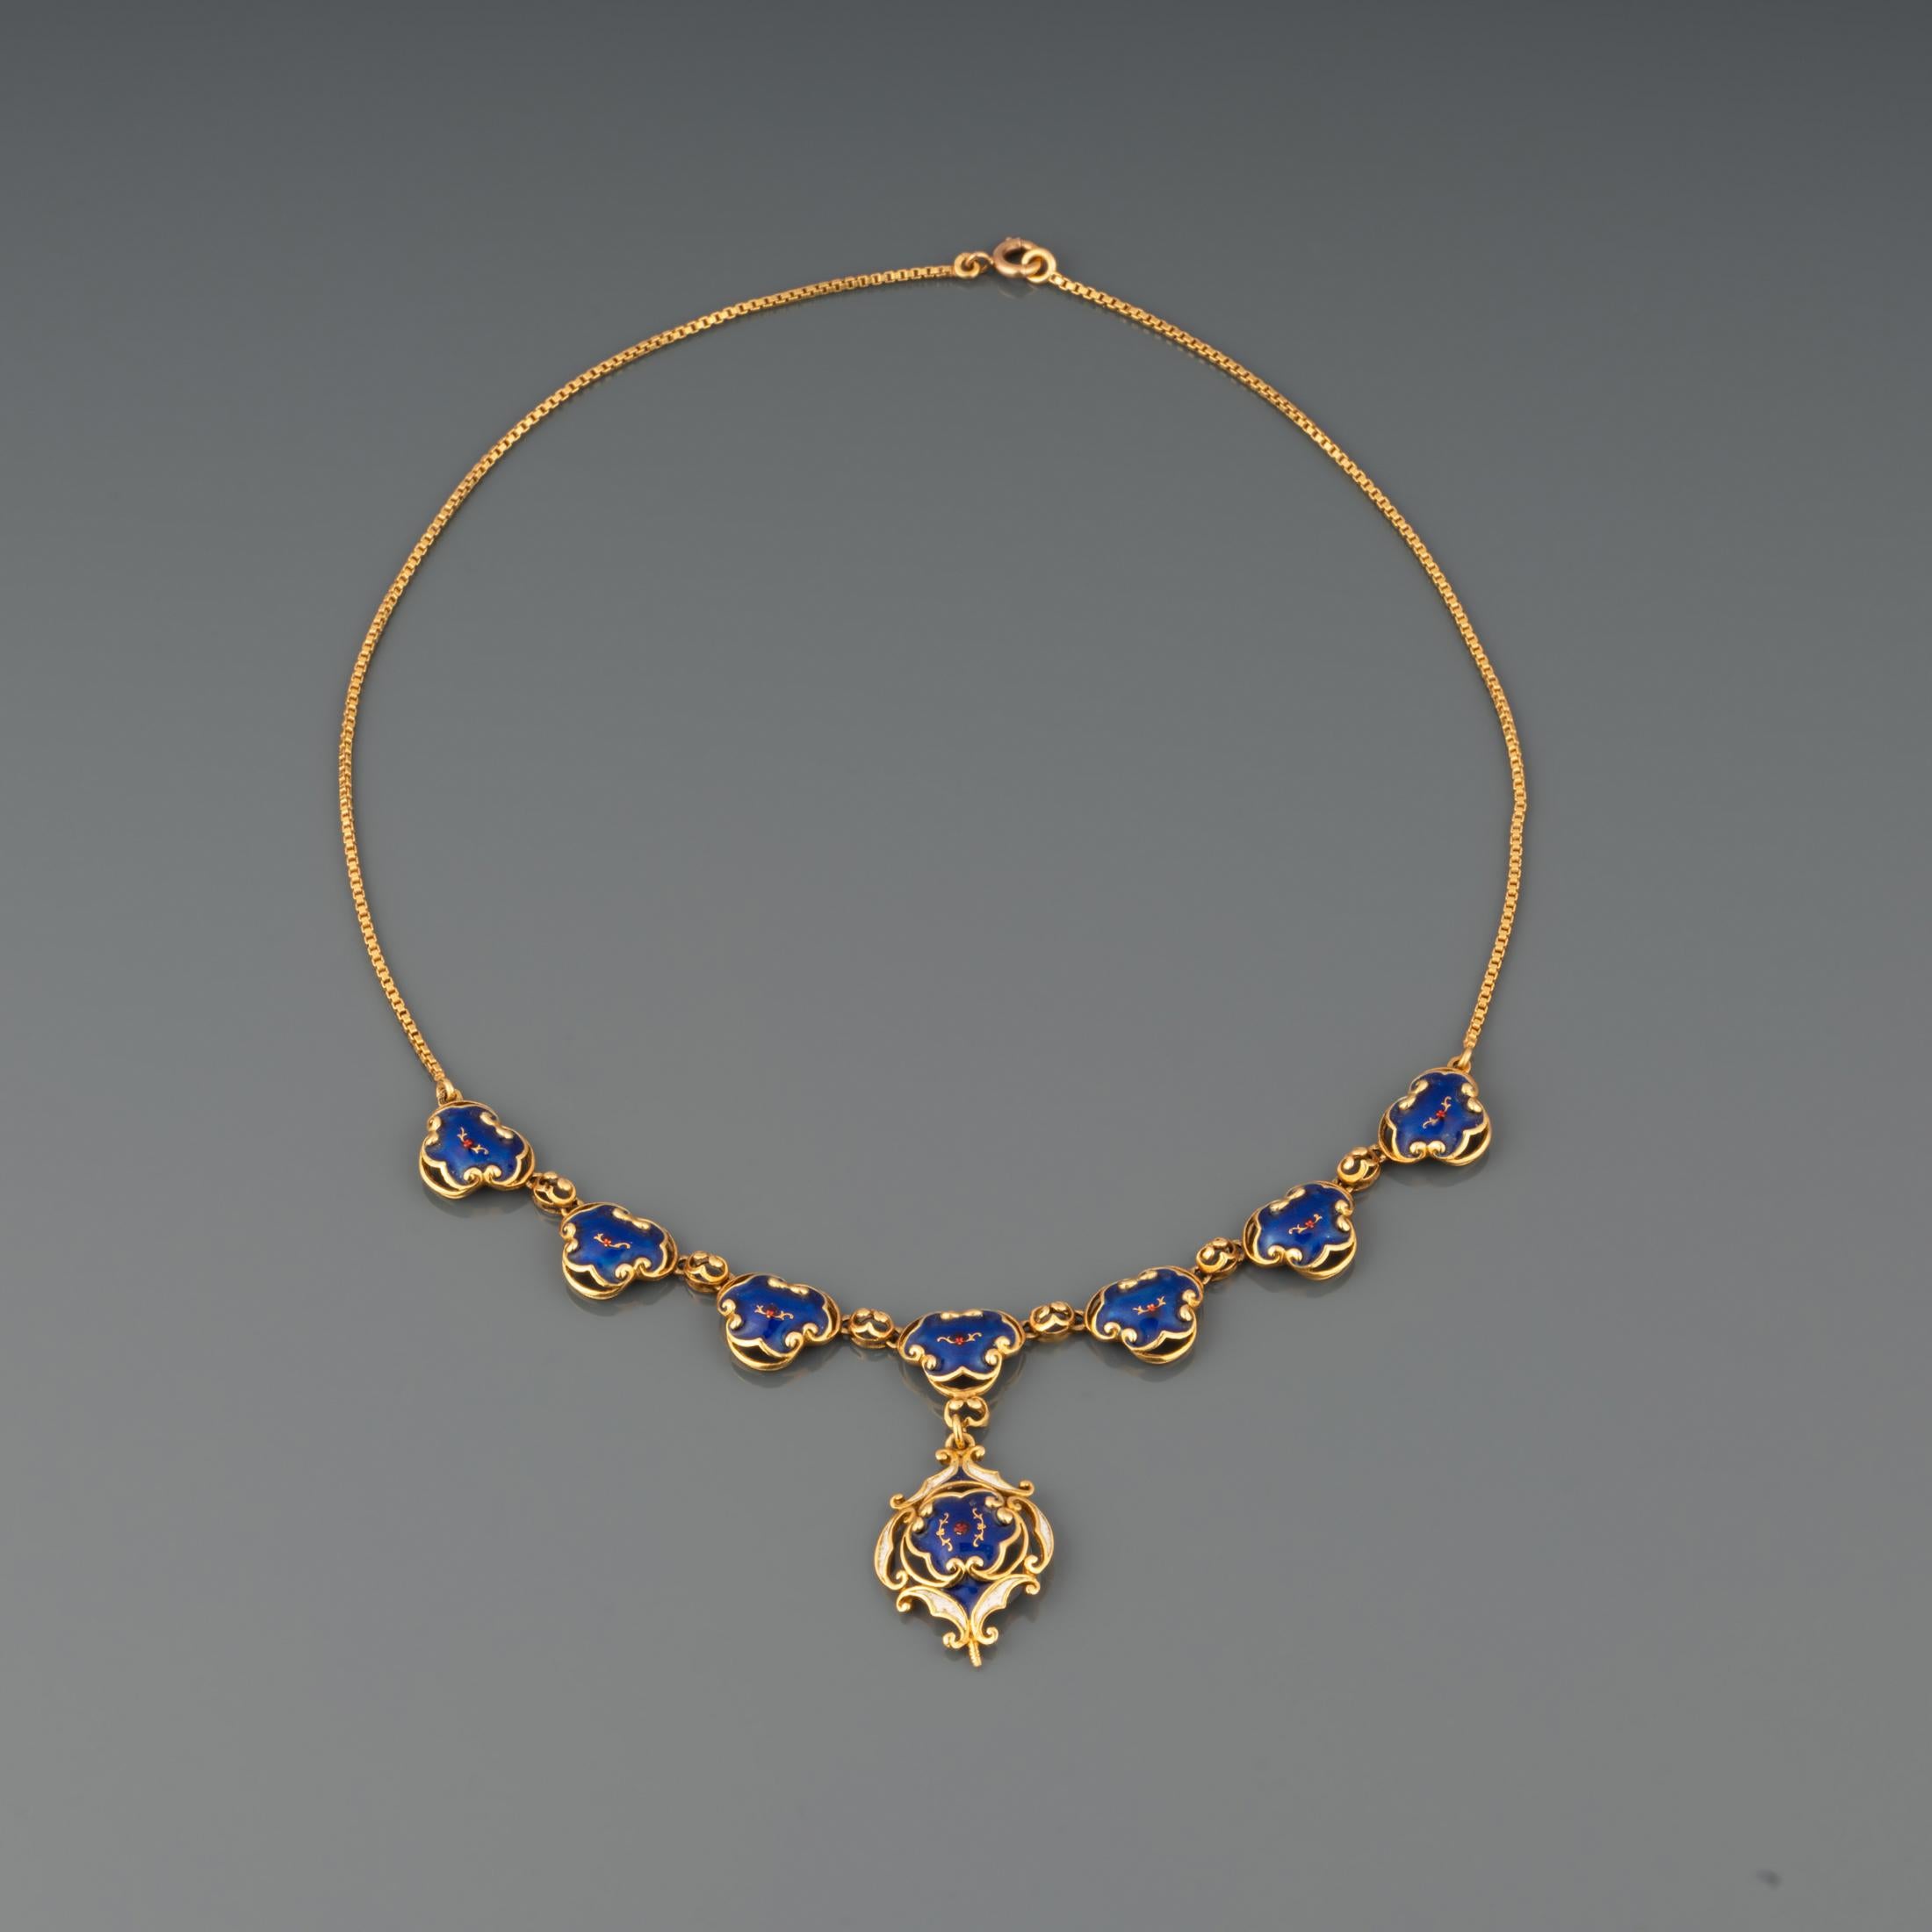 A very lovely antique necklace, European made in 19th century.

Made in yellow gold 18k (French hallmark: the owl).

Painted with blue/white/enamel, in good condition.

The length is 41 cm or 16,4 inches.

Weight: 14.20 grams